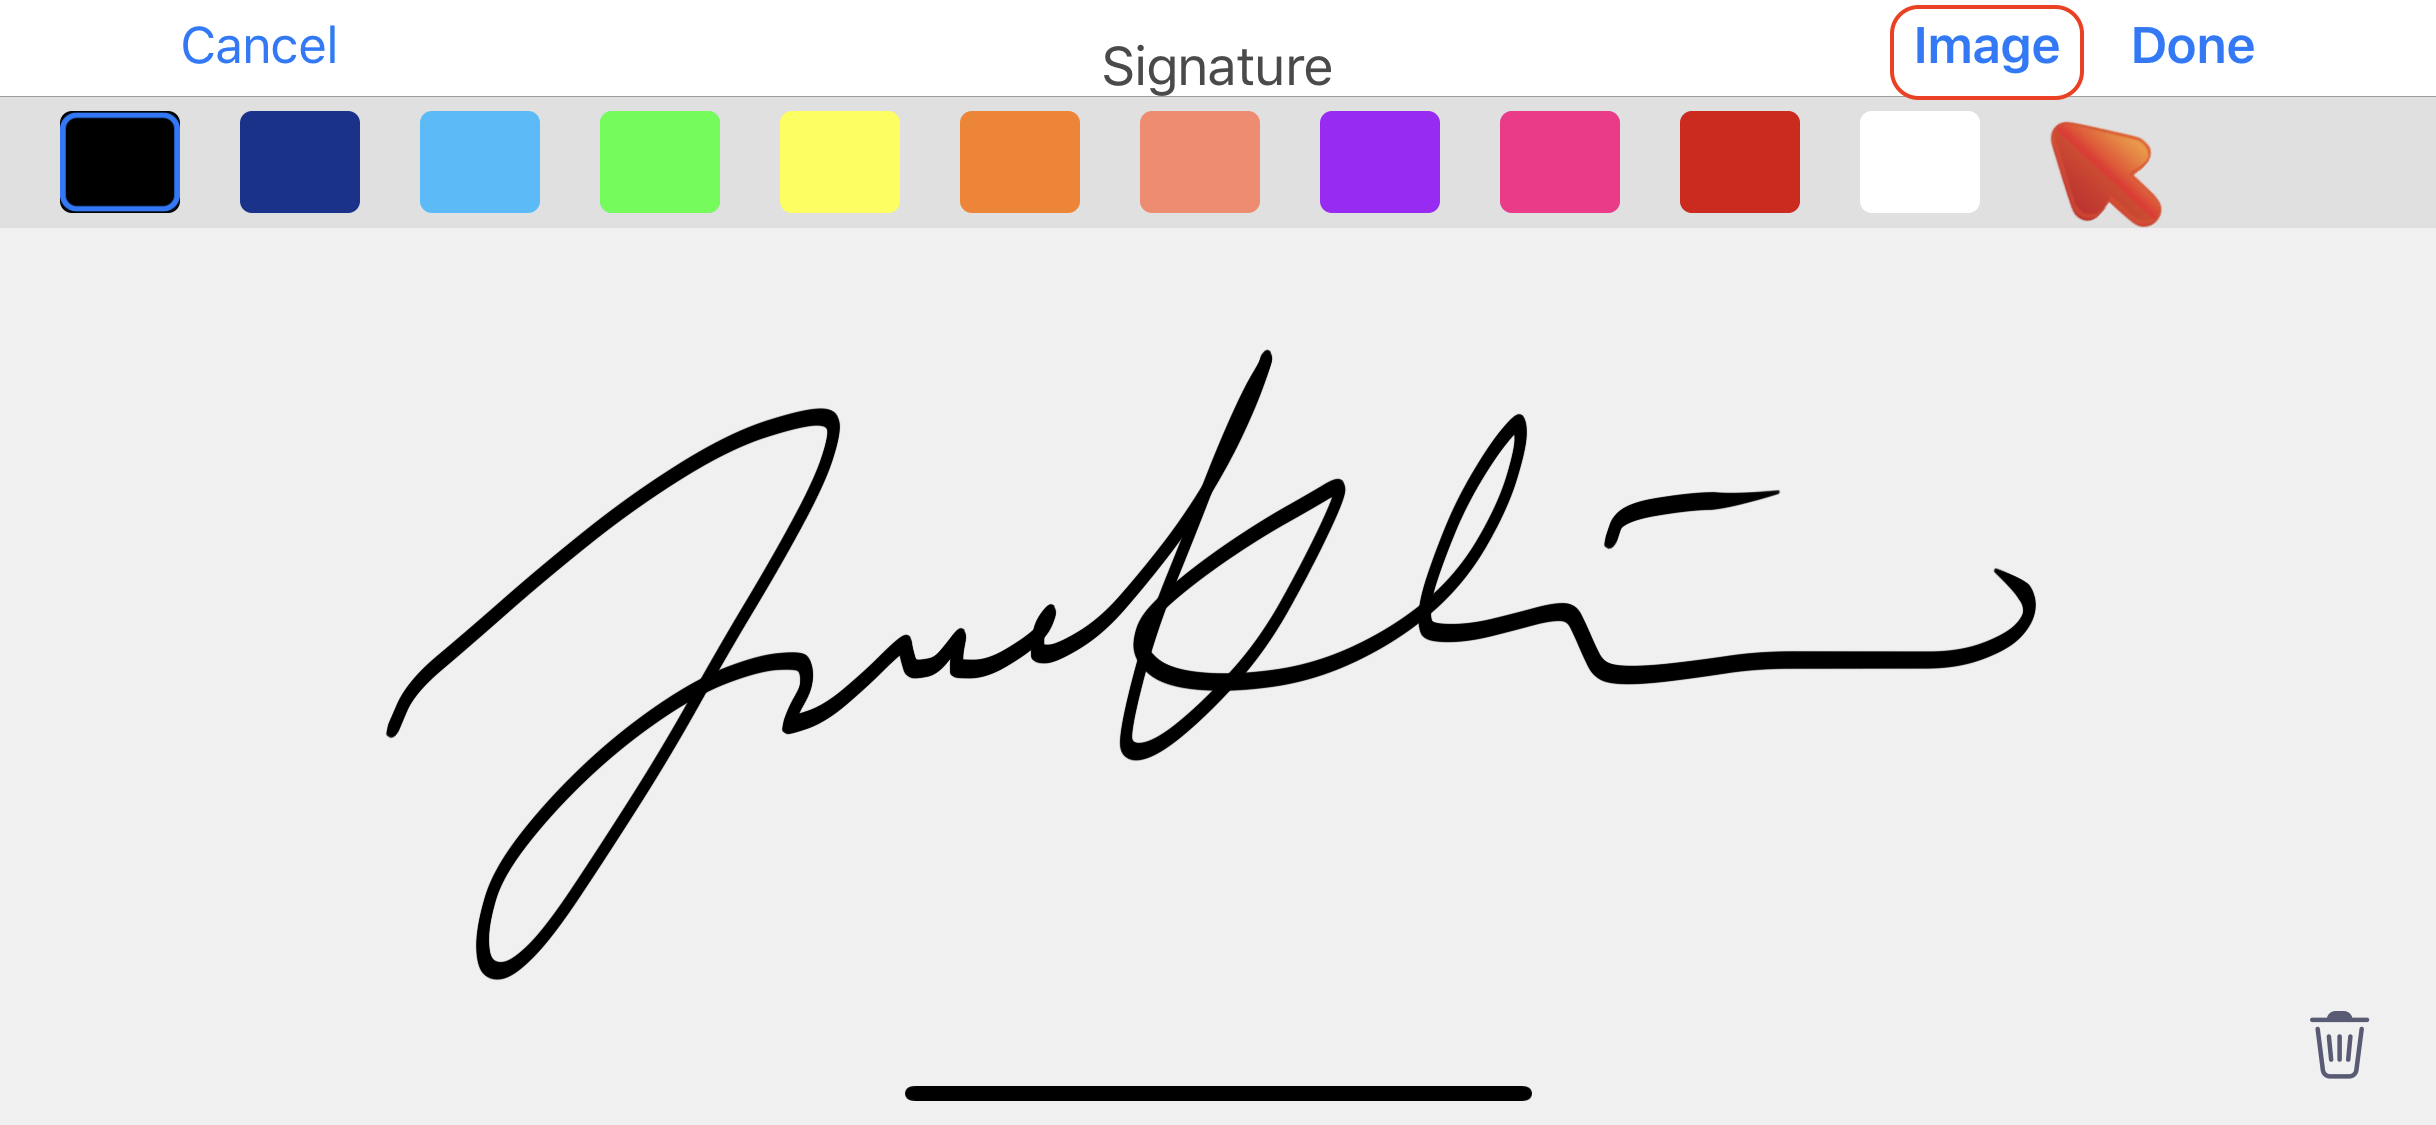 View_PDfs_Signature_Create.PNG